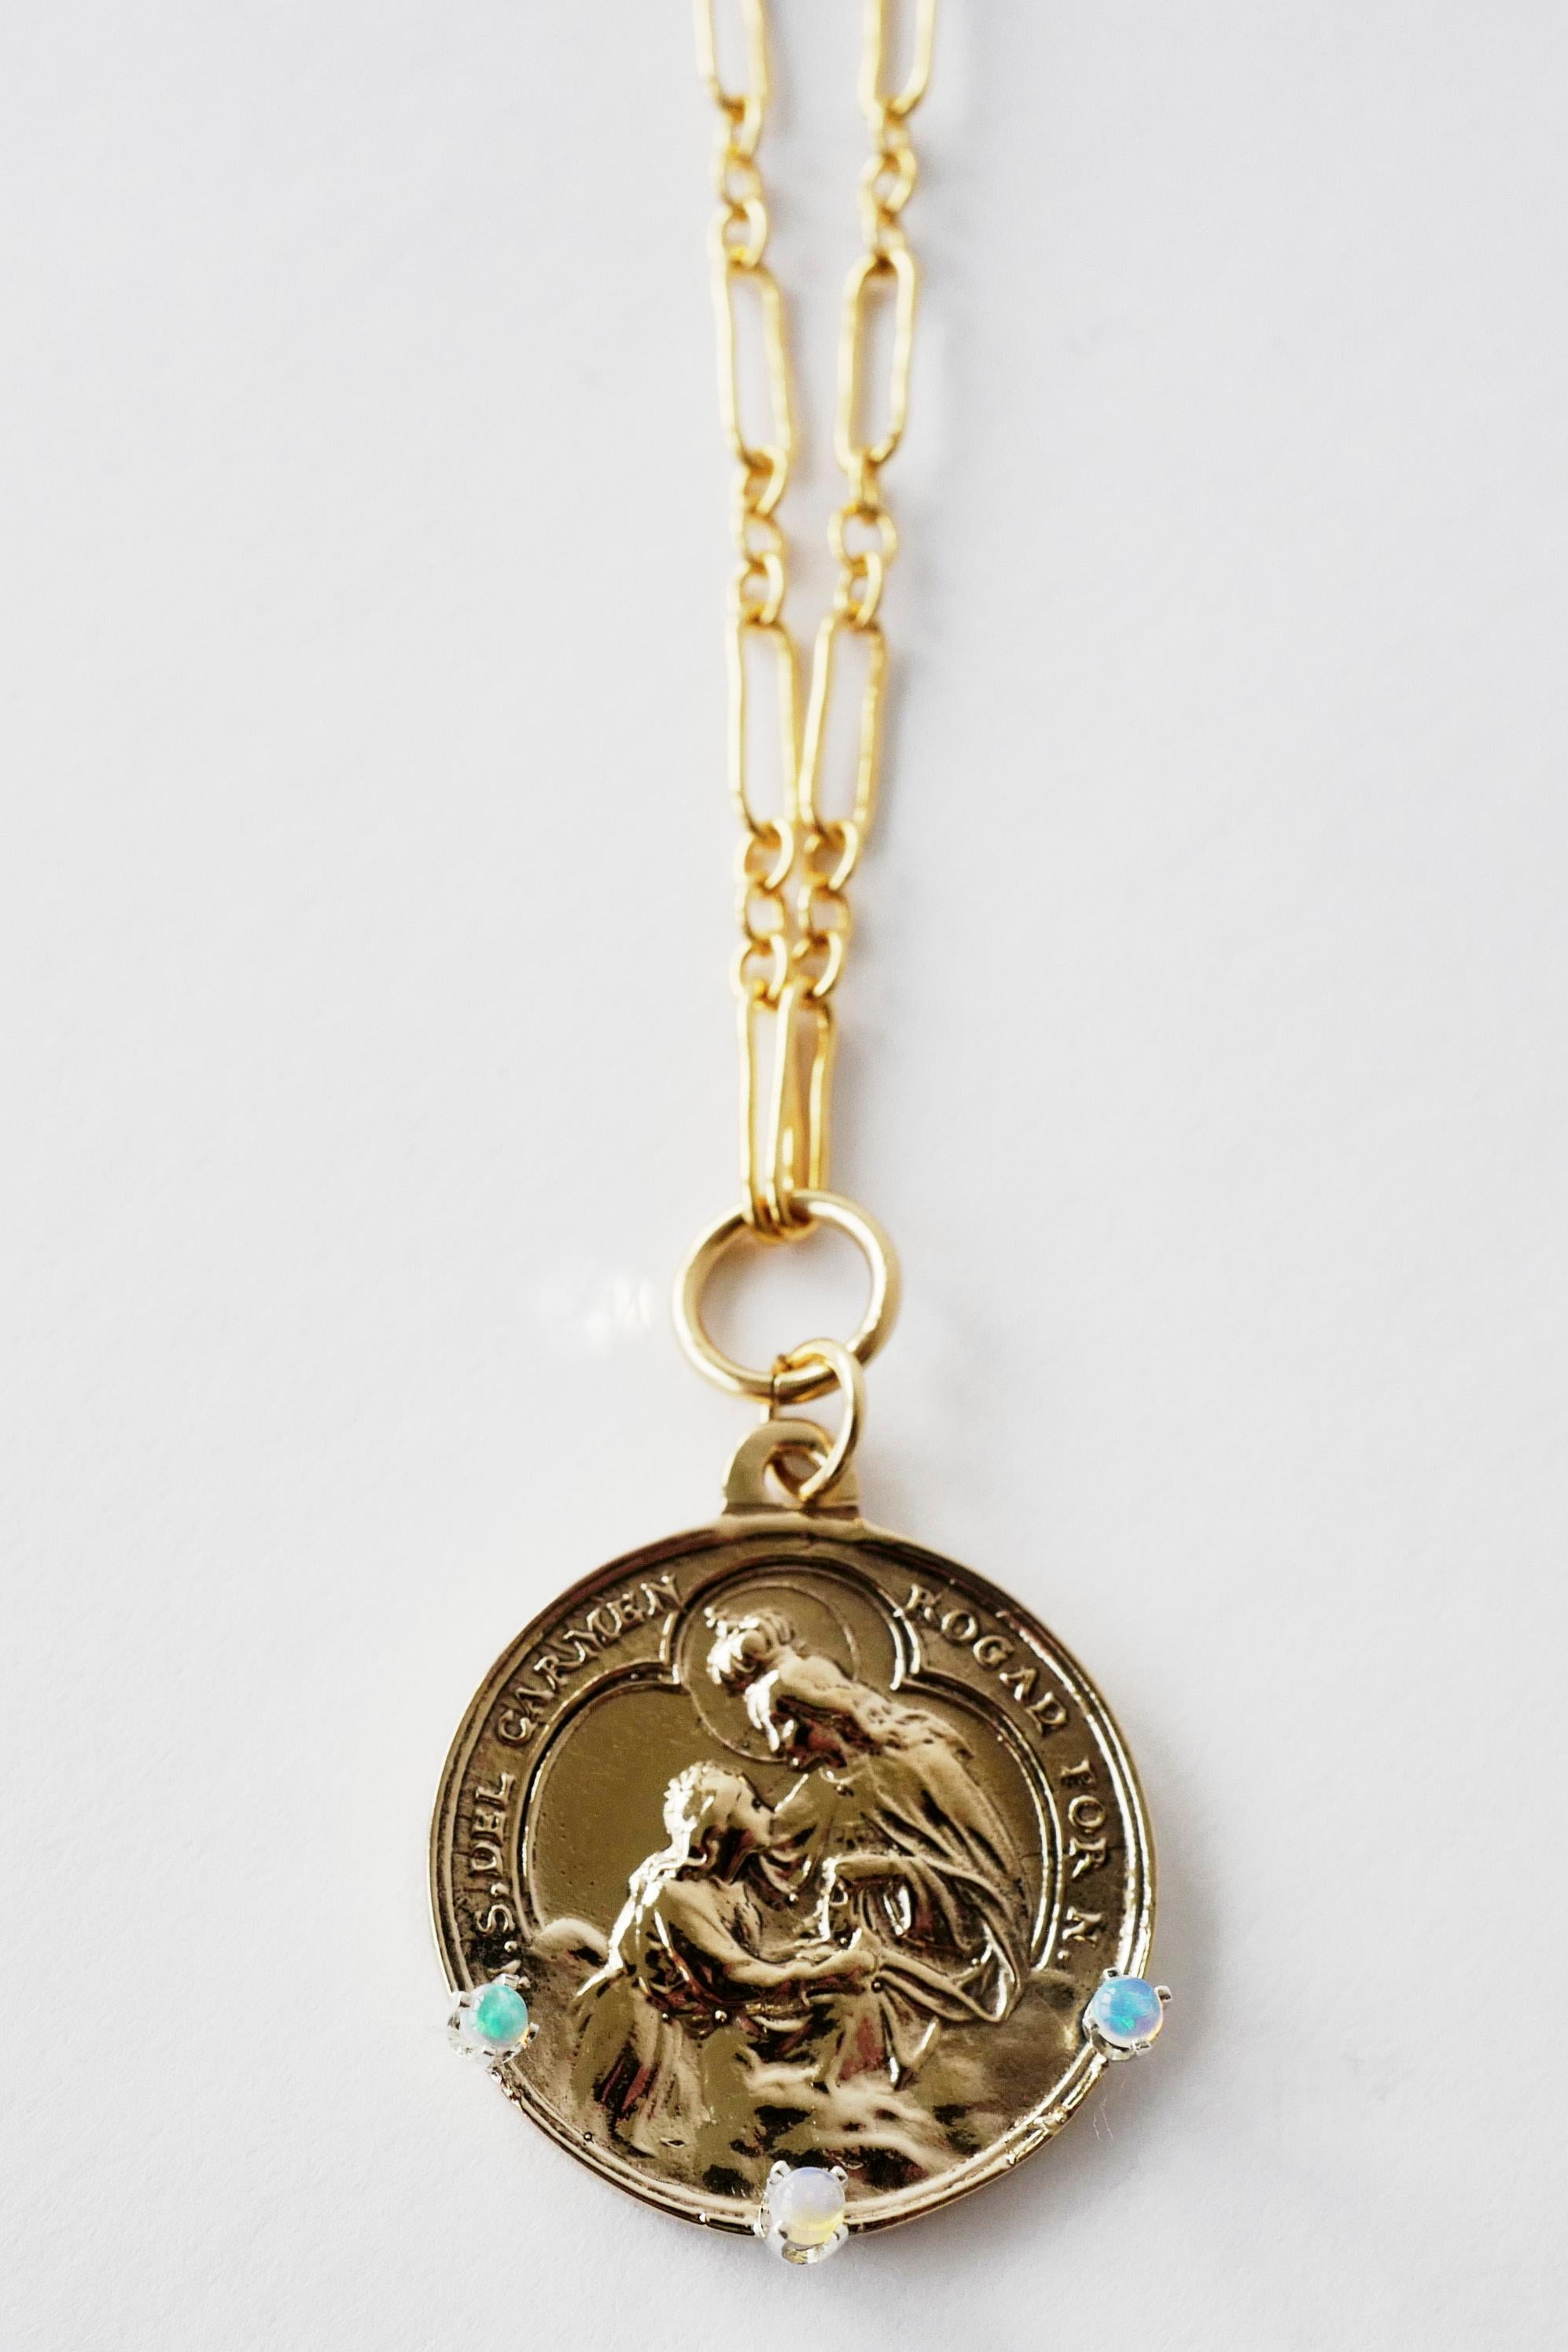 Medal Necklace Chain Virgin Mary Opals Round Coin Pendant J Dauphin For Sale 1